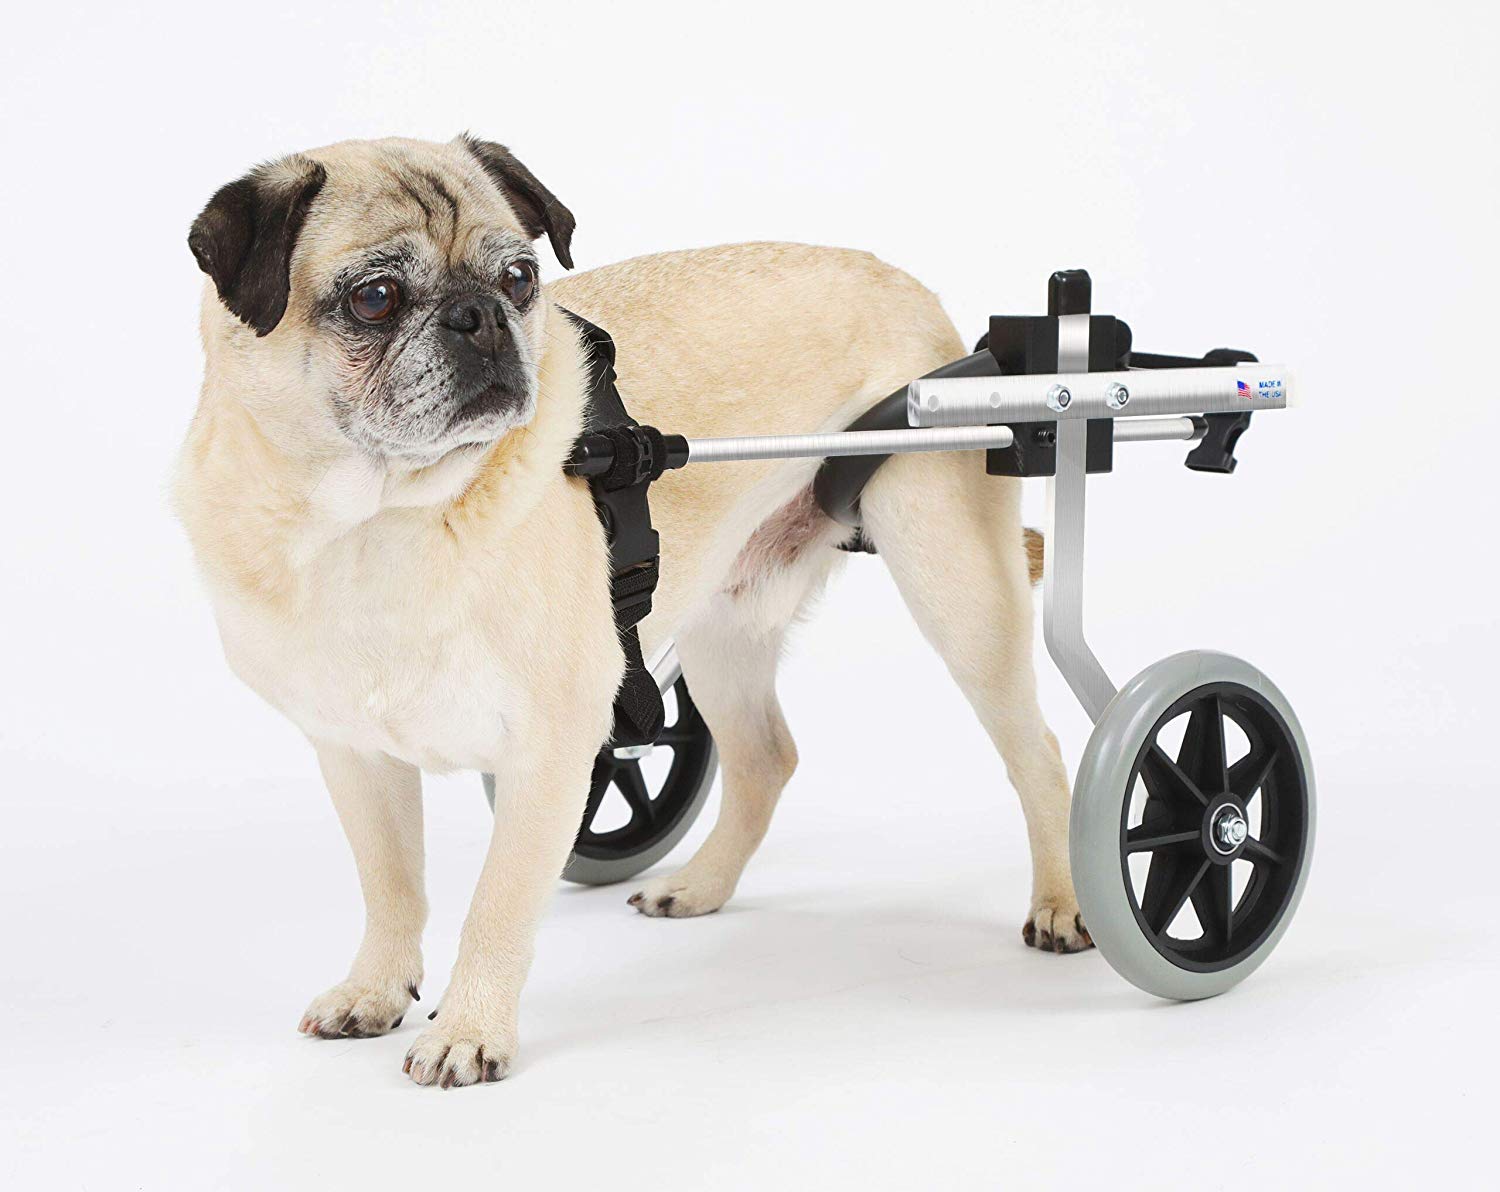 Wheelchairs for Dogs